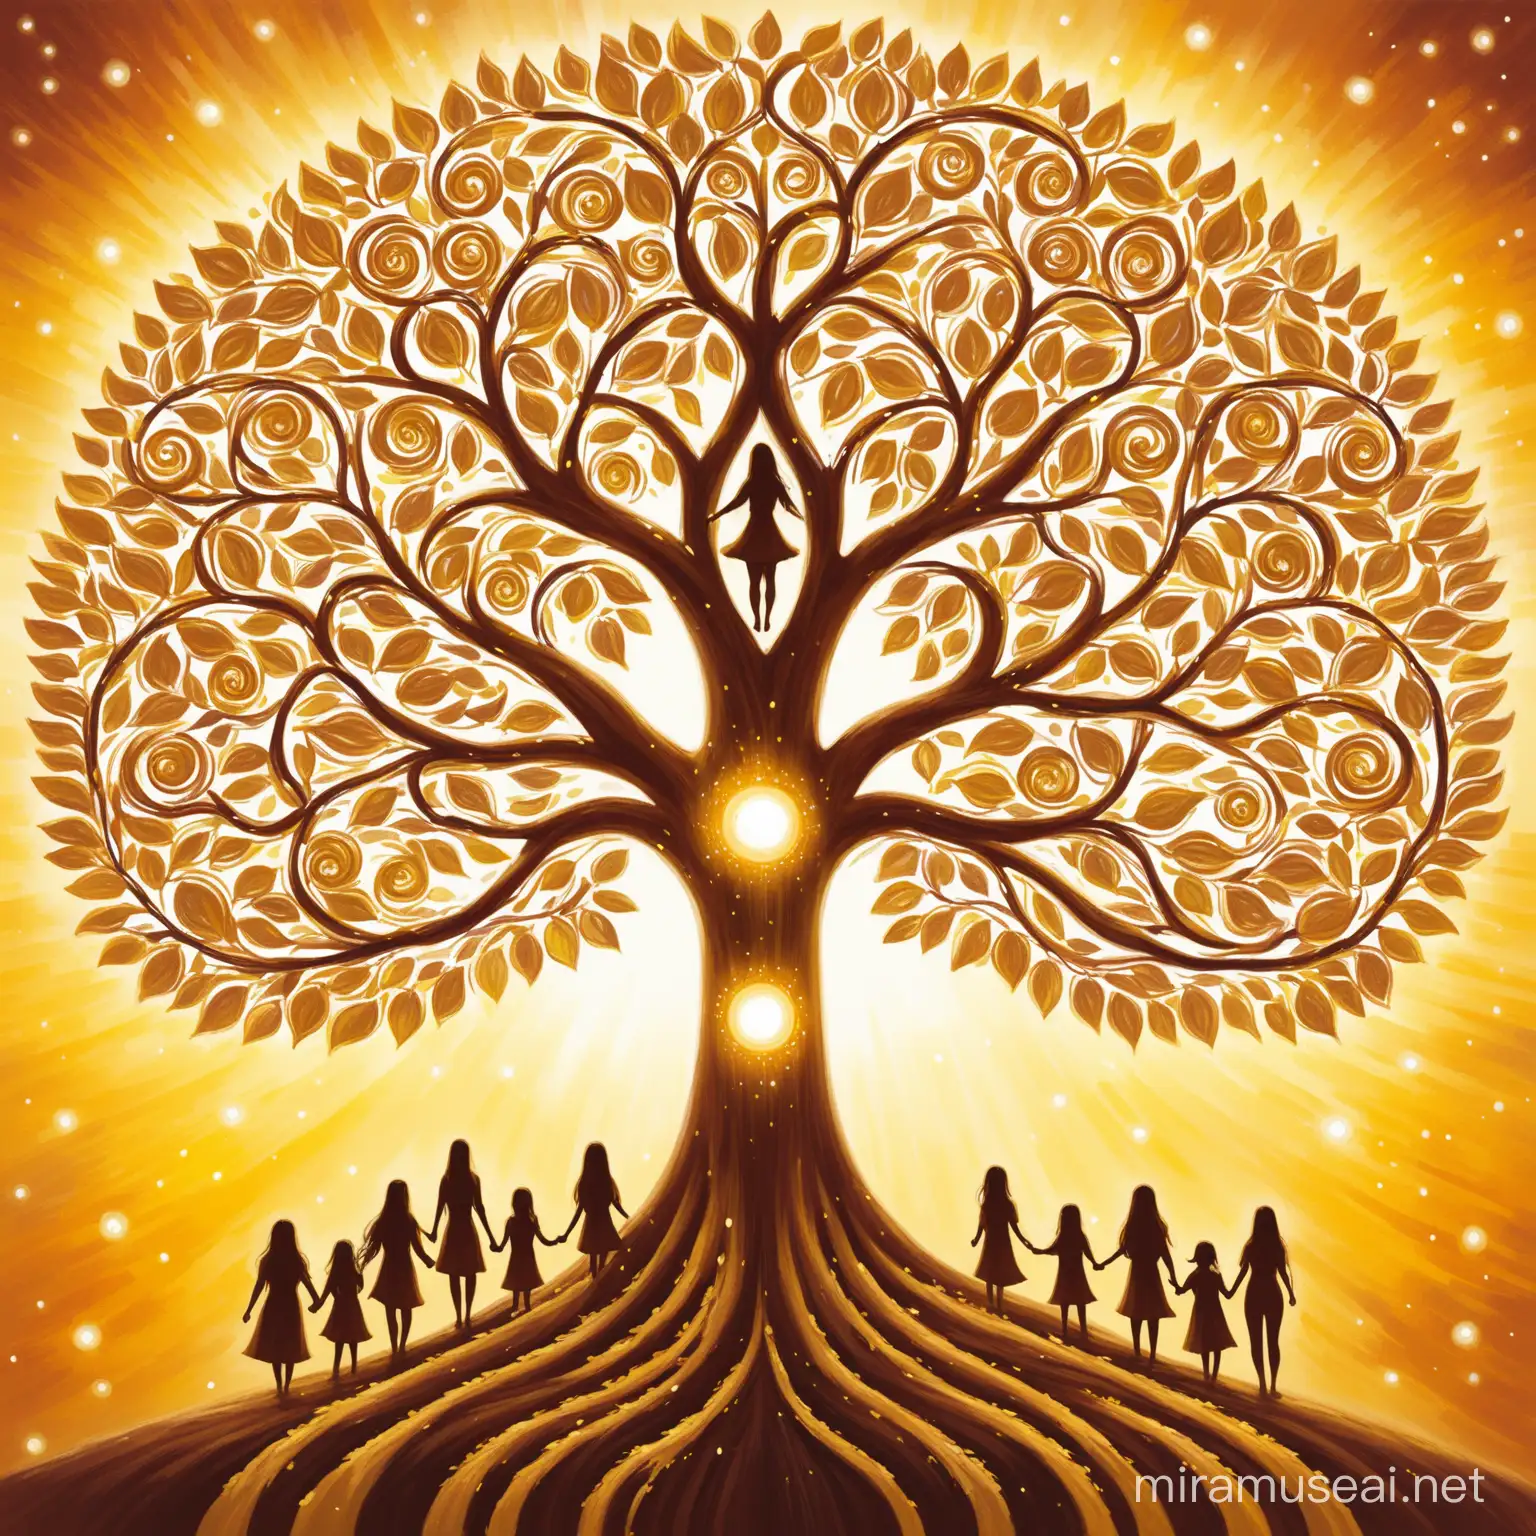 The power of Woman, The tree of life, The tree of family